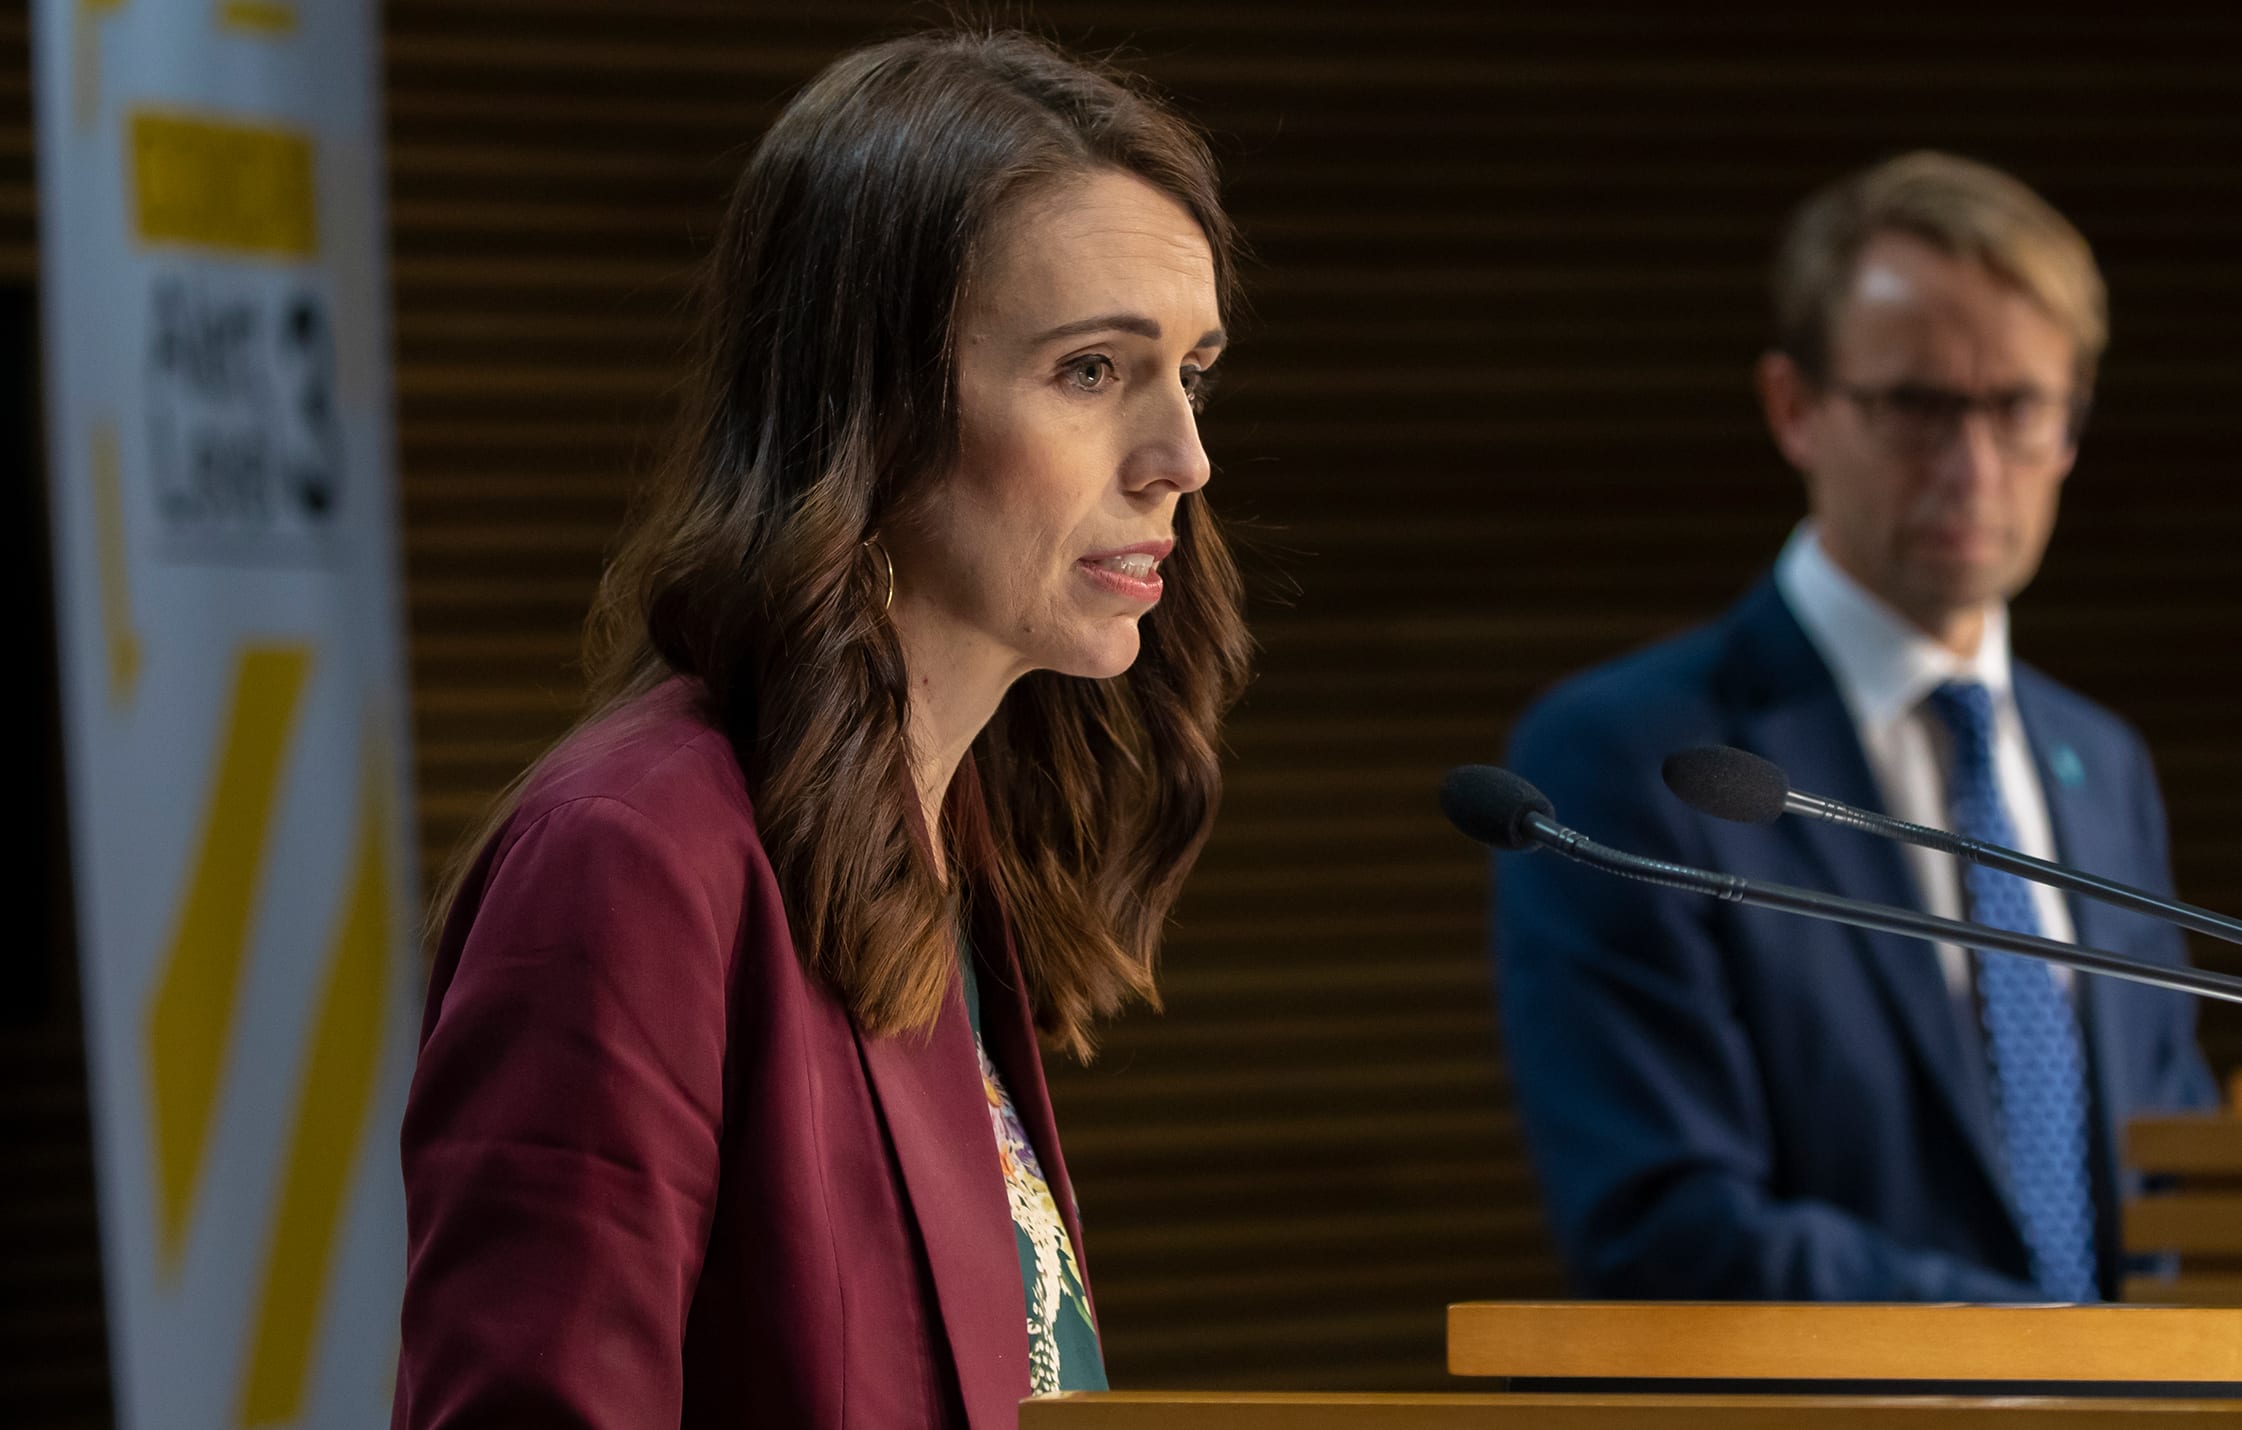 Prime Minister Jacinda Ardern and Director-General of Health Dr Ashley Bloomfield talk to media during a Covid-19 coronavirus briefing on 6 May, 2020.